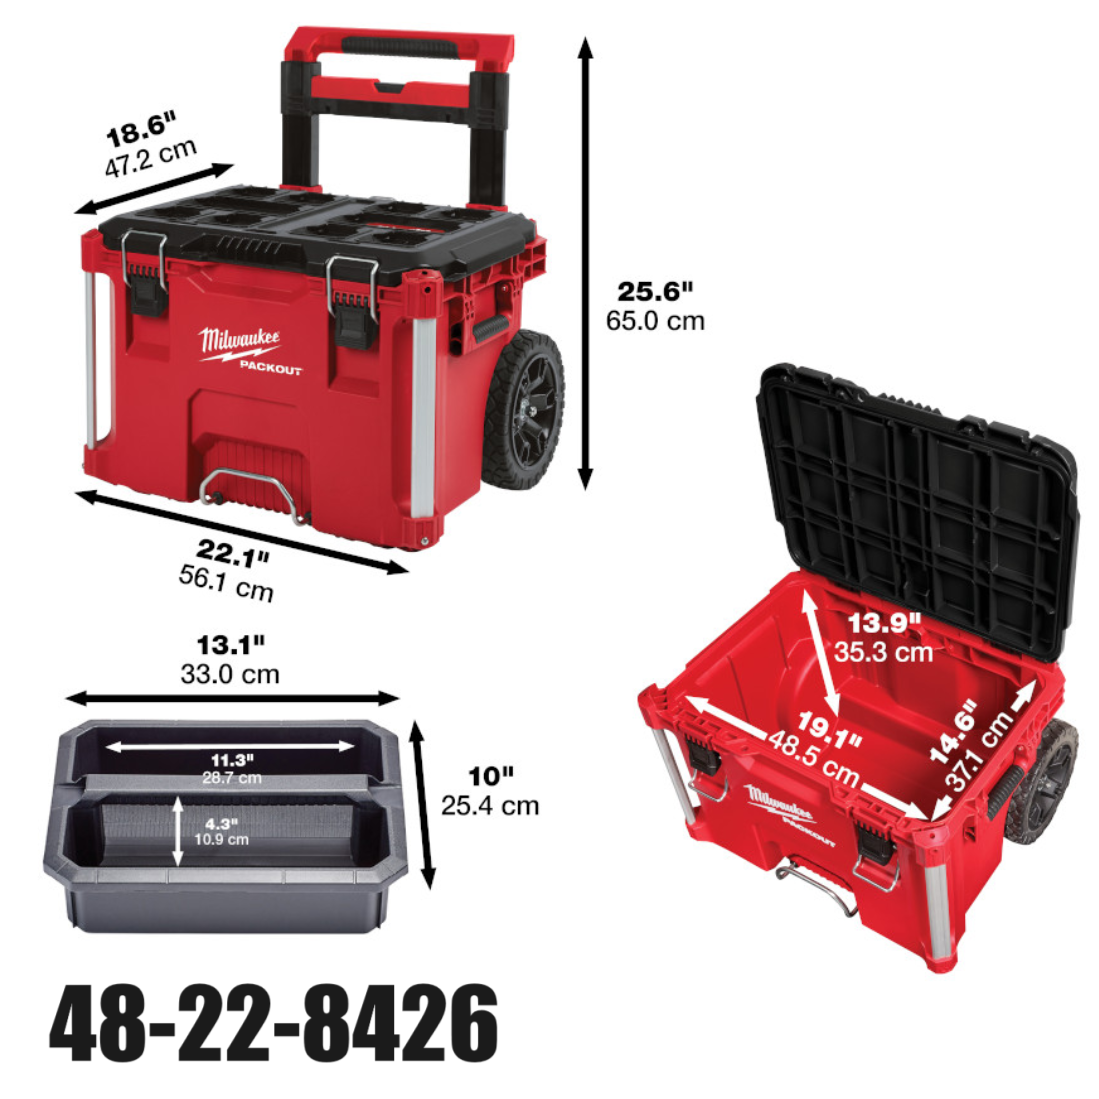 MILWAUKEE PACKOUT Rolling Tool Box 48-22-8426